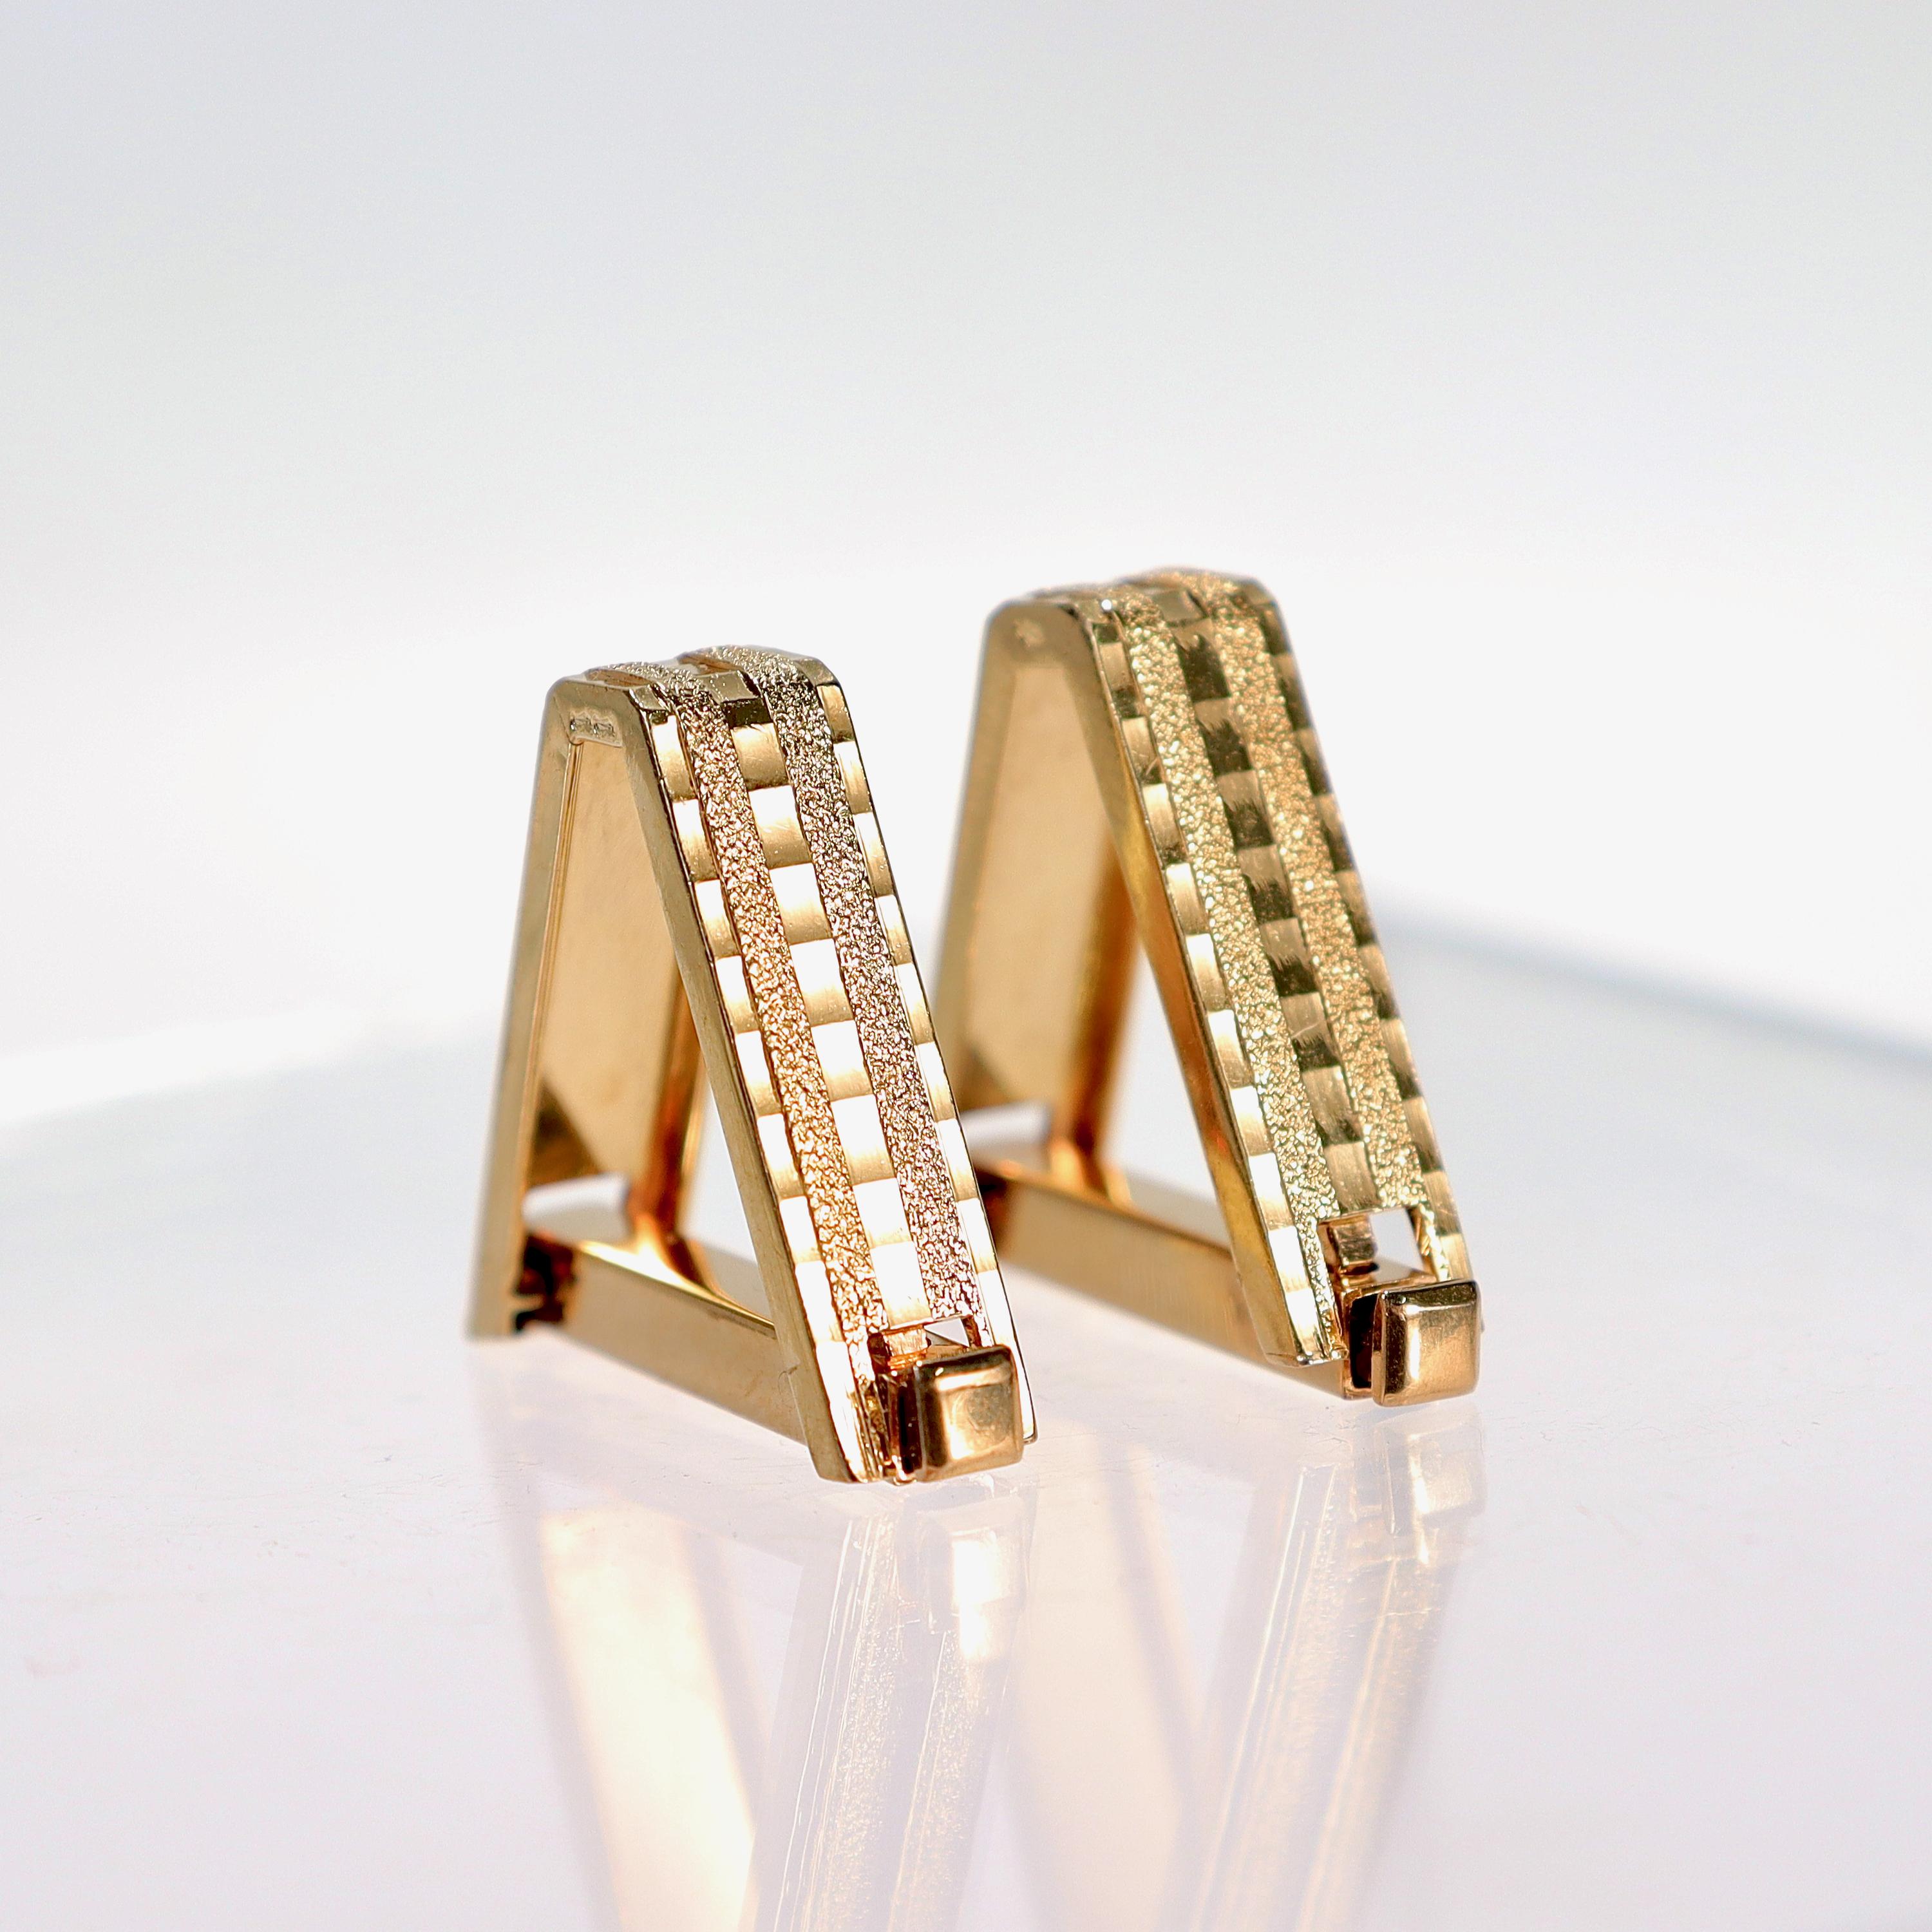 Signed 18 Karat French Gold Triangular or Wrapped Cufflinks For Sale 2